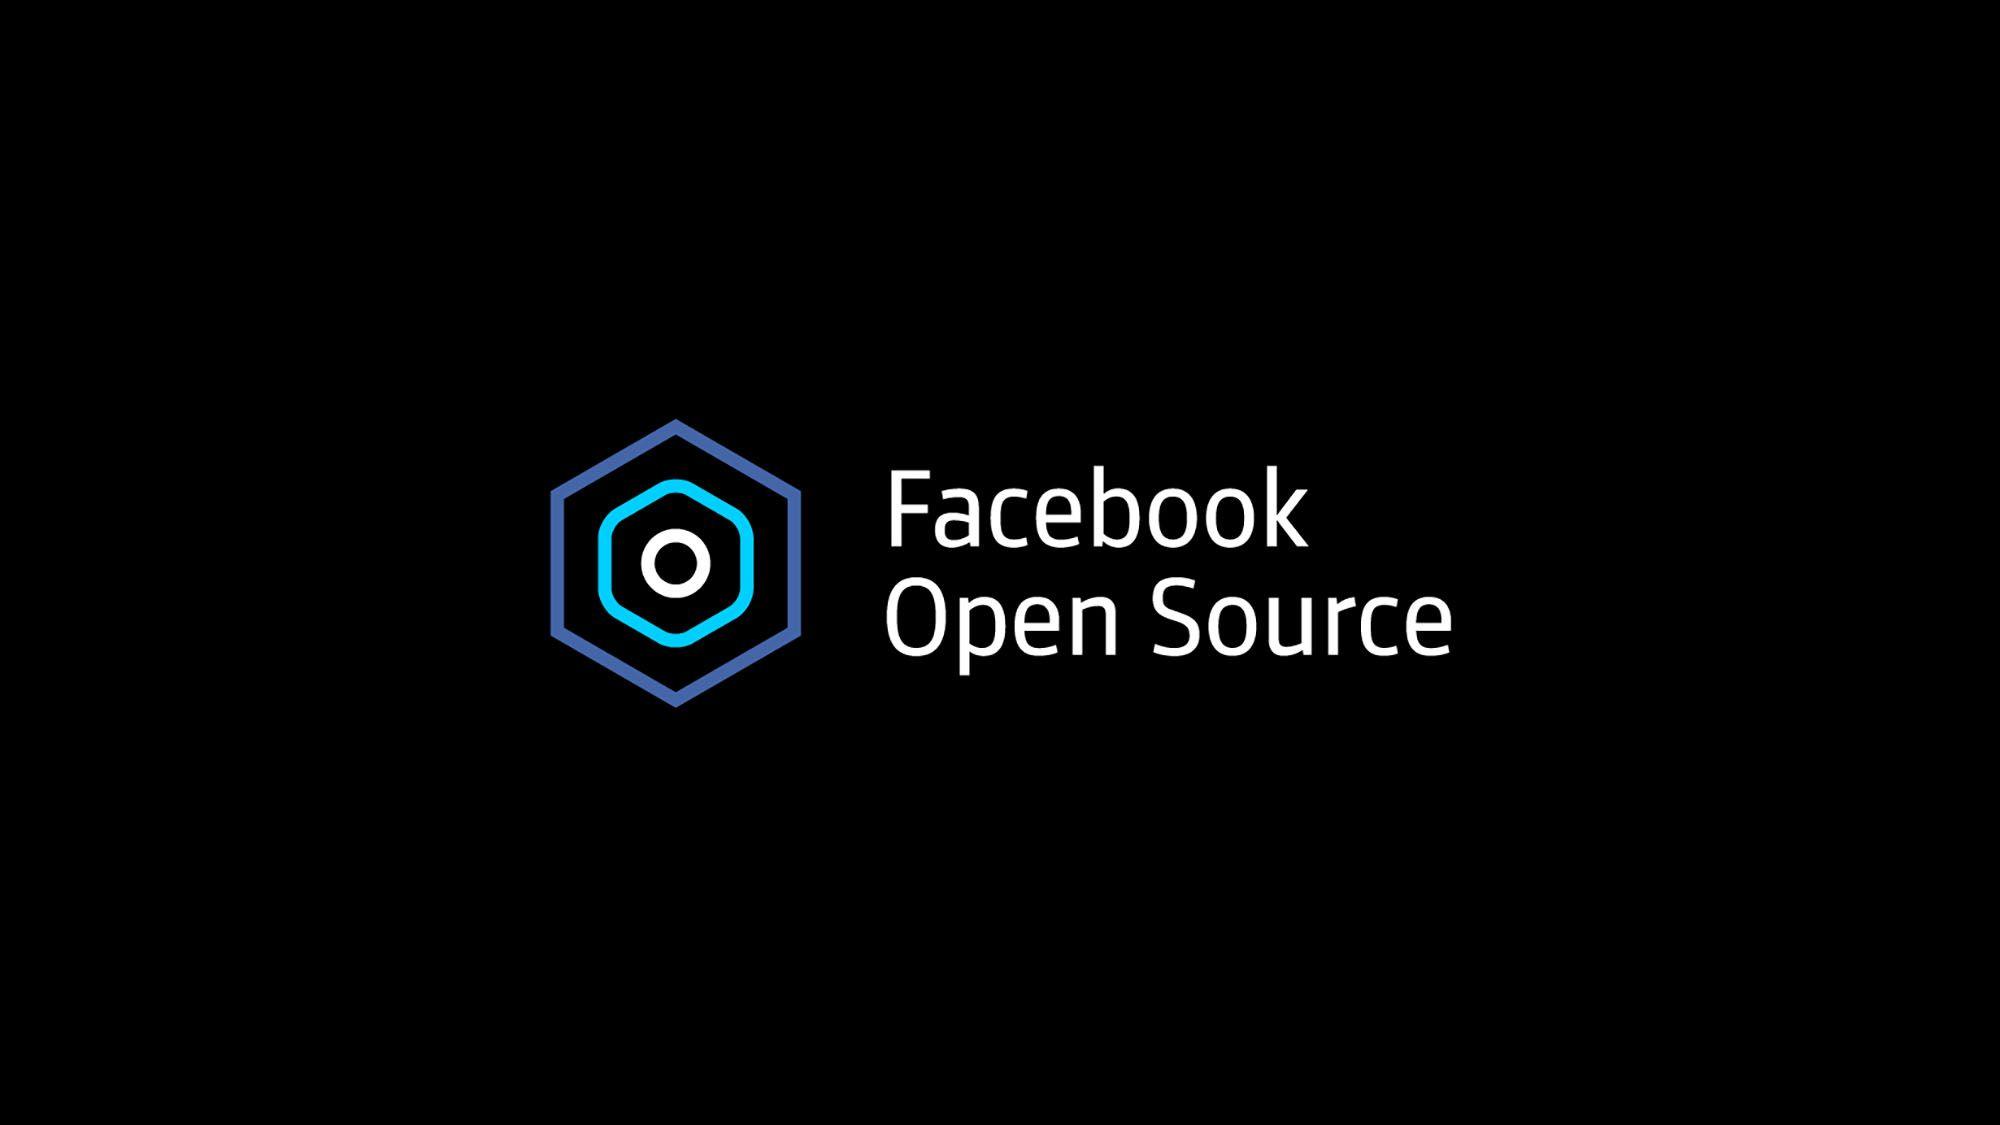 F8 Logo - F8 open source at Facebook's 2019 F8 conference